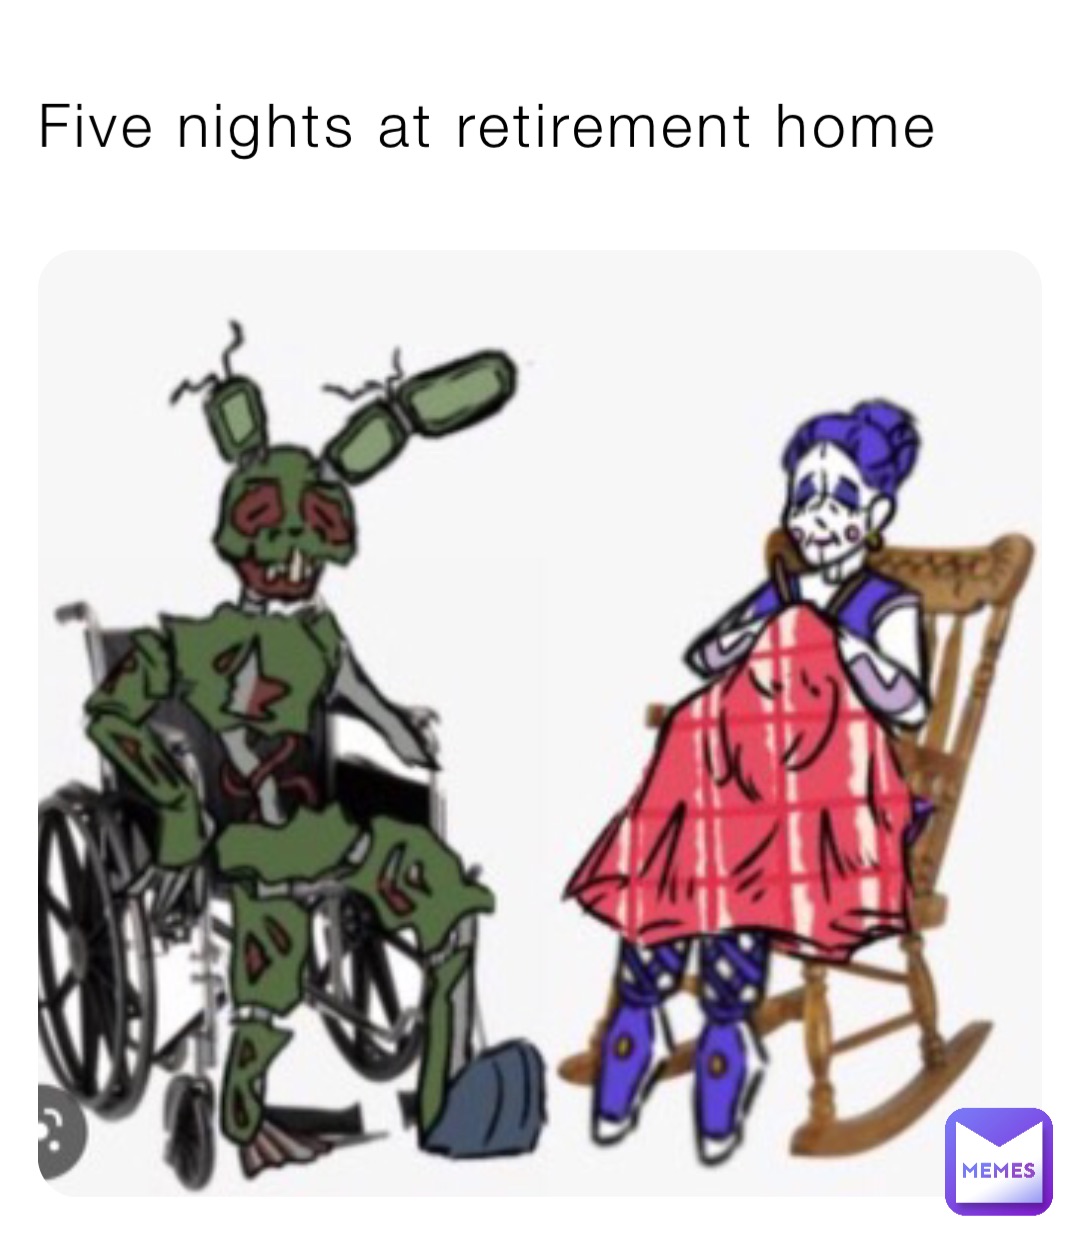 Five nights at retirement home